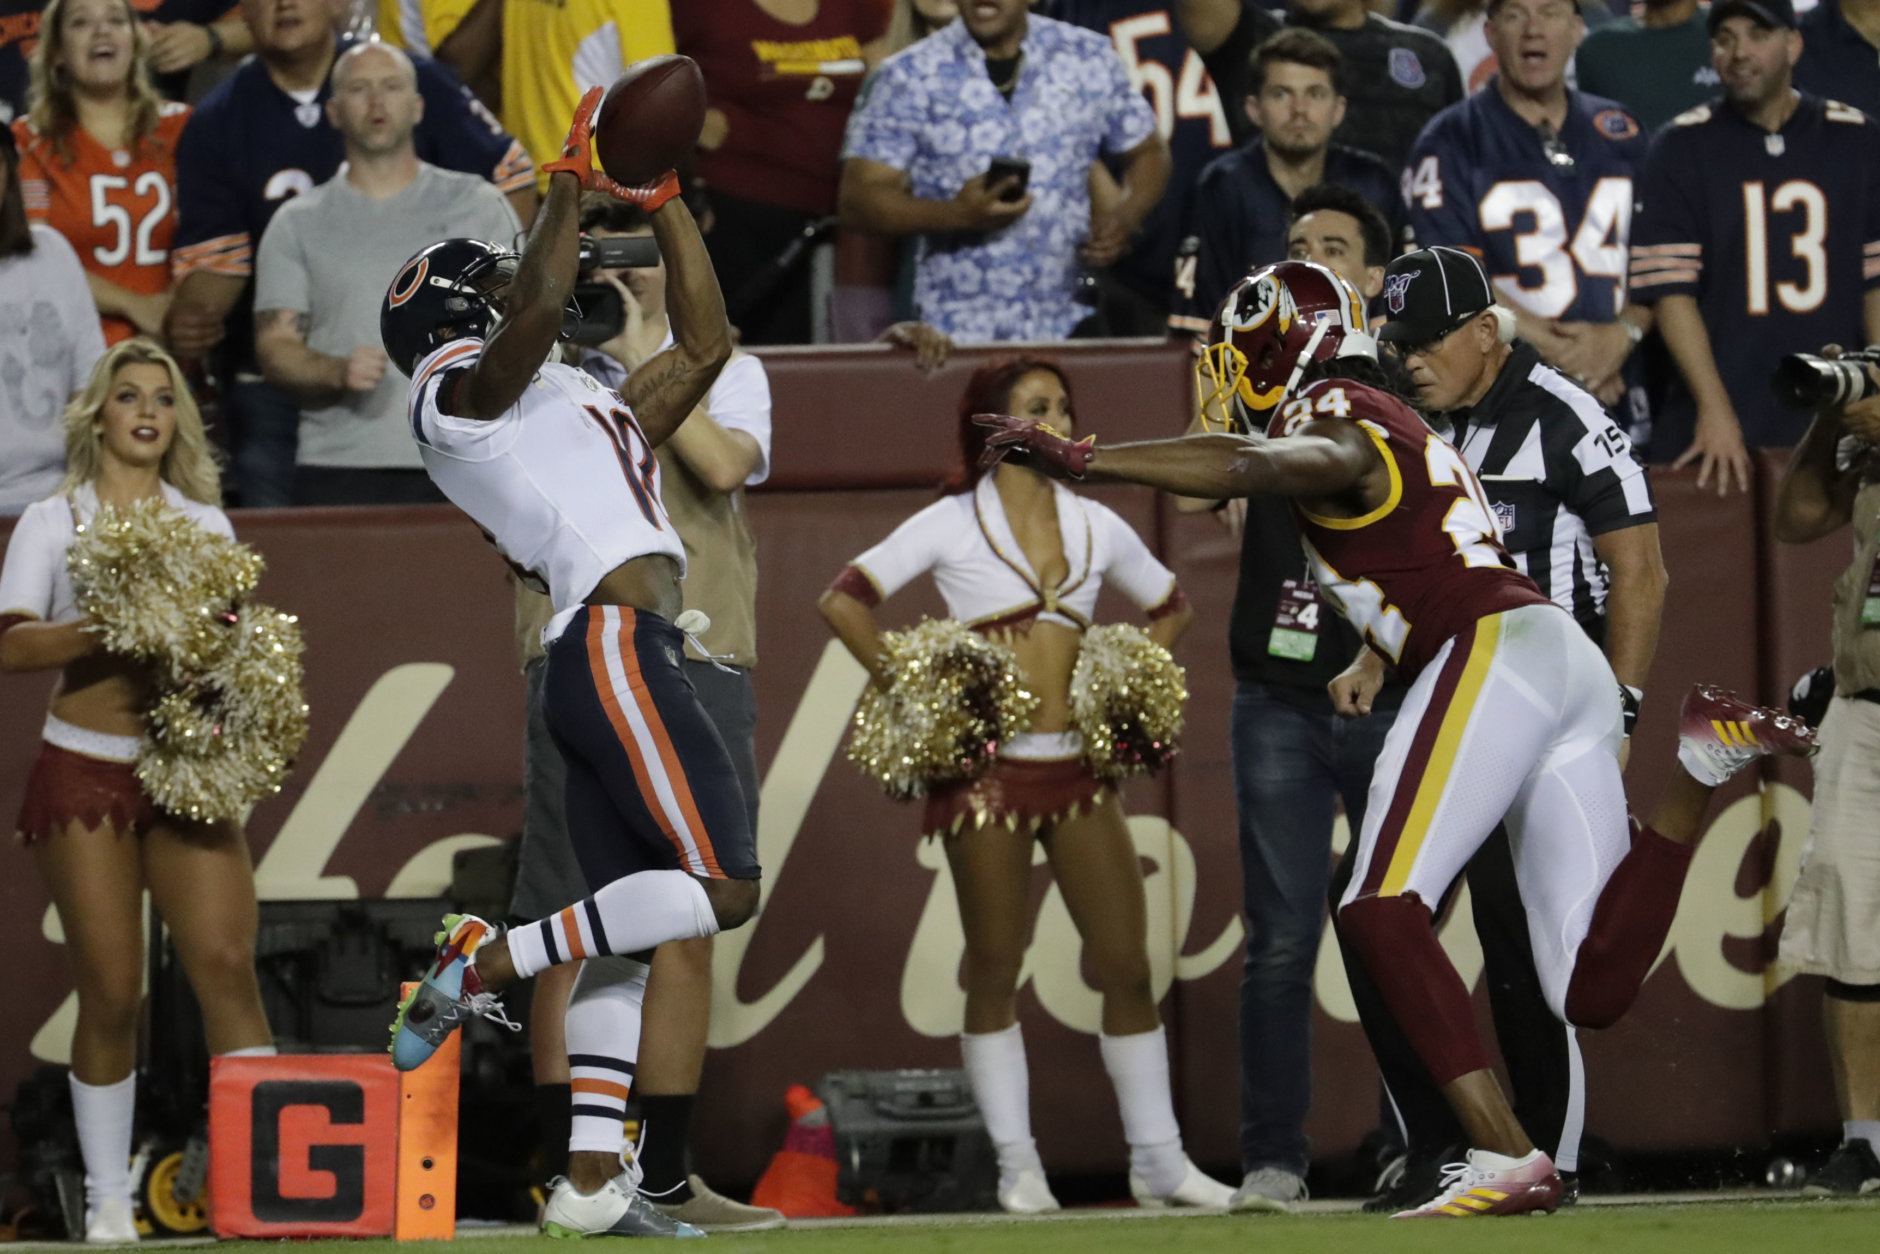 Chicago Bears wide receiver Taylor Gabriel (18) catches a pass for a touchdown in front of Washington Redskins cornerback Josh Norman (24) during the first half of an NFL football game Monday, Sept. 23, 2019, in Landover, Md. (AP Photo/Julio Cortez)